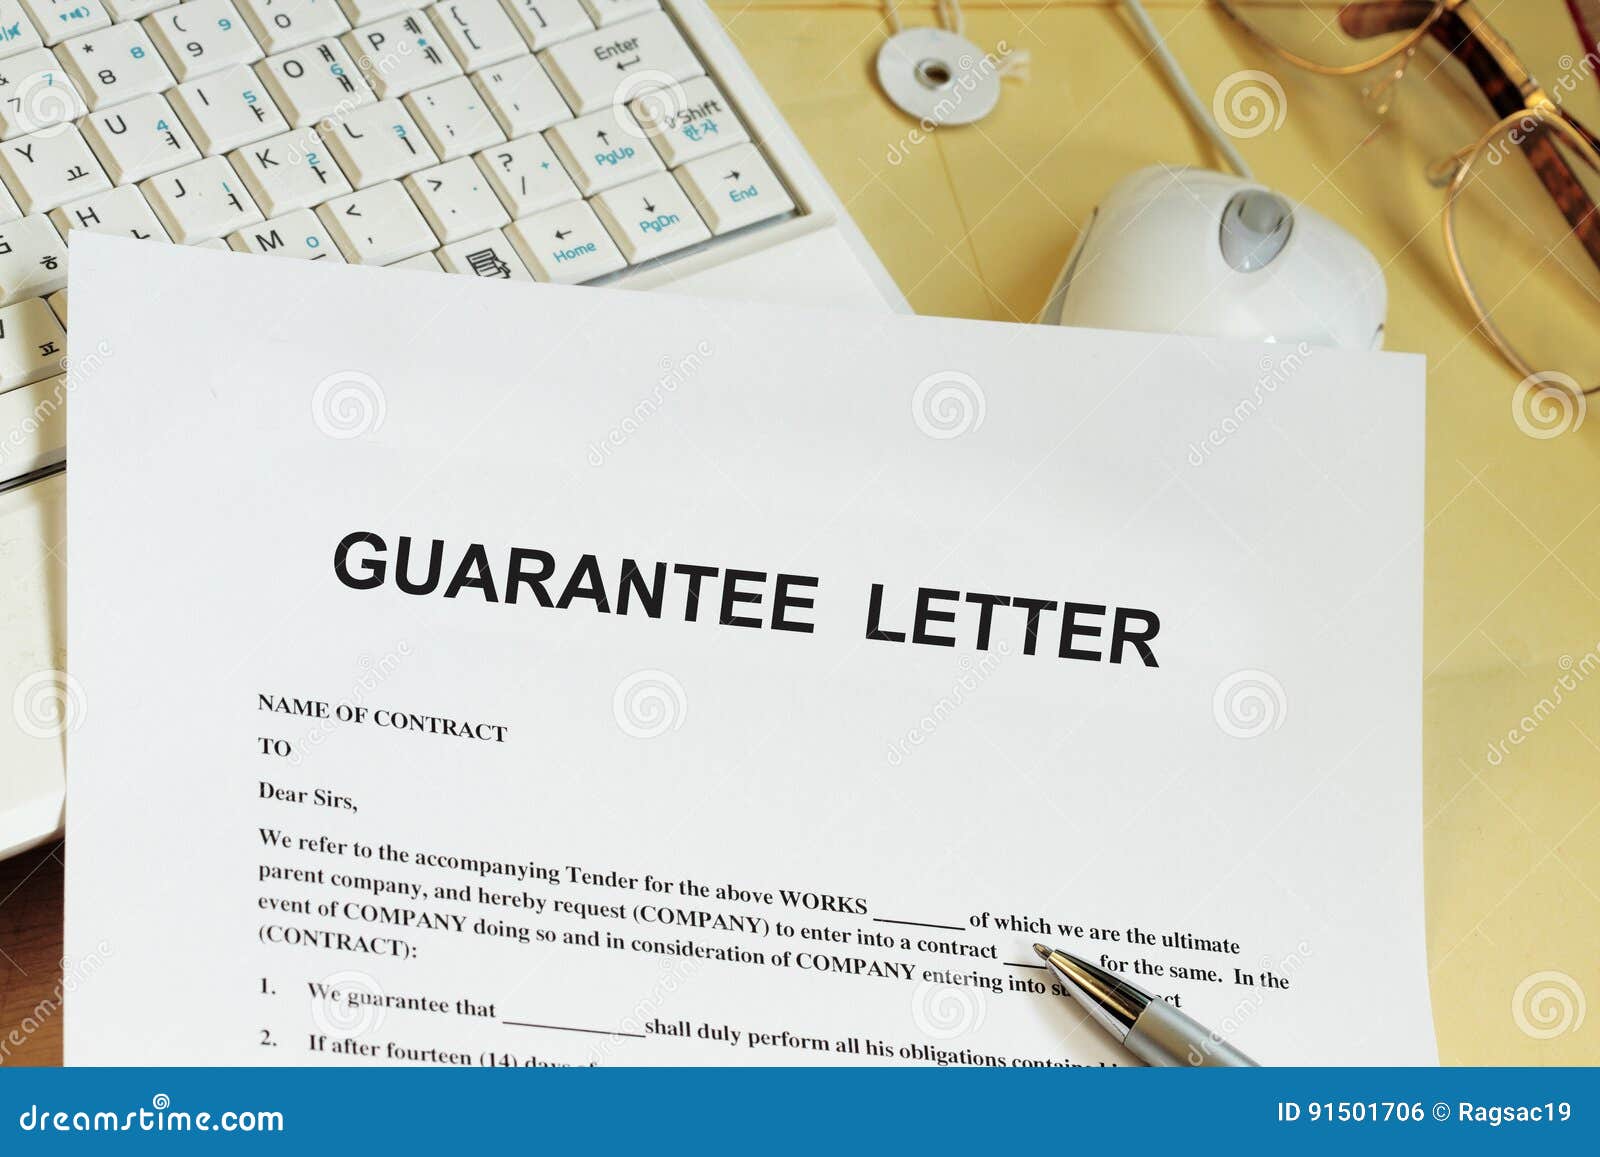 Guarantee letter stock photo. Image of paperwork, system - 91501706